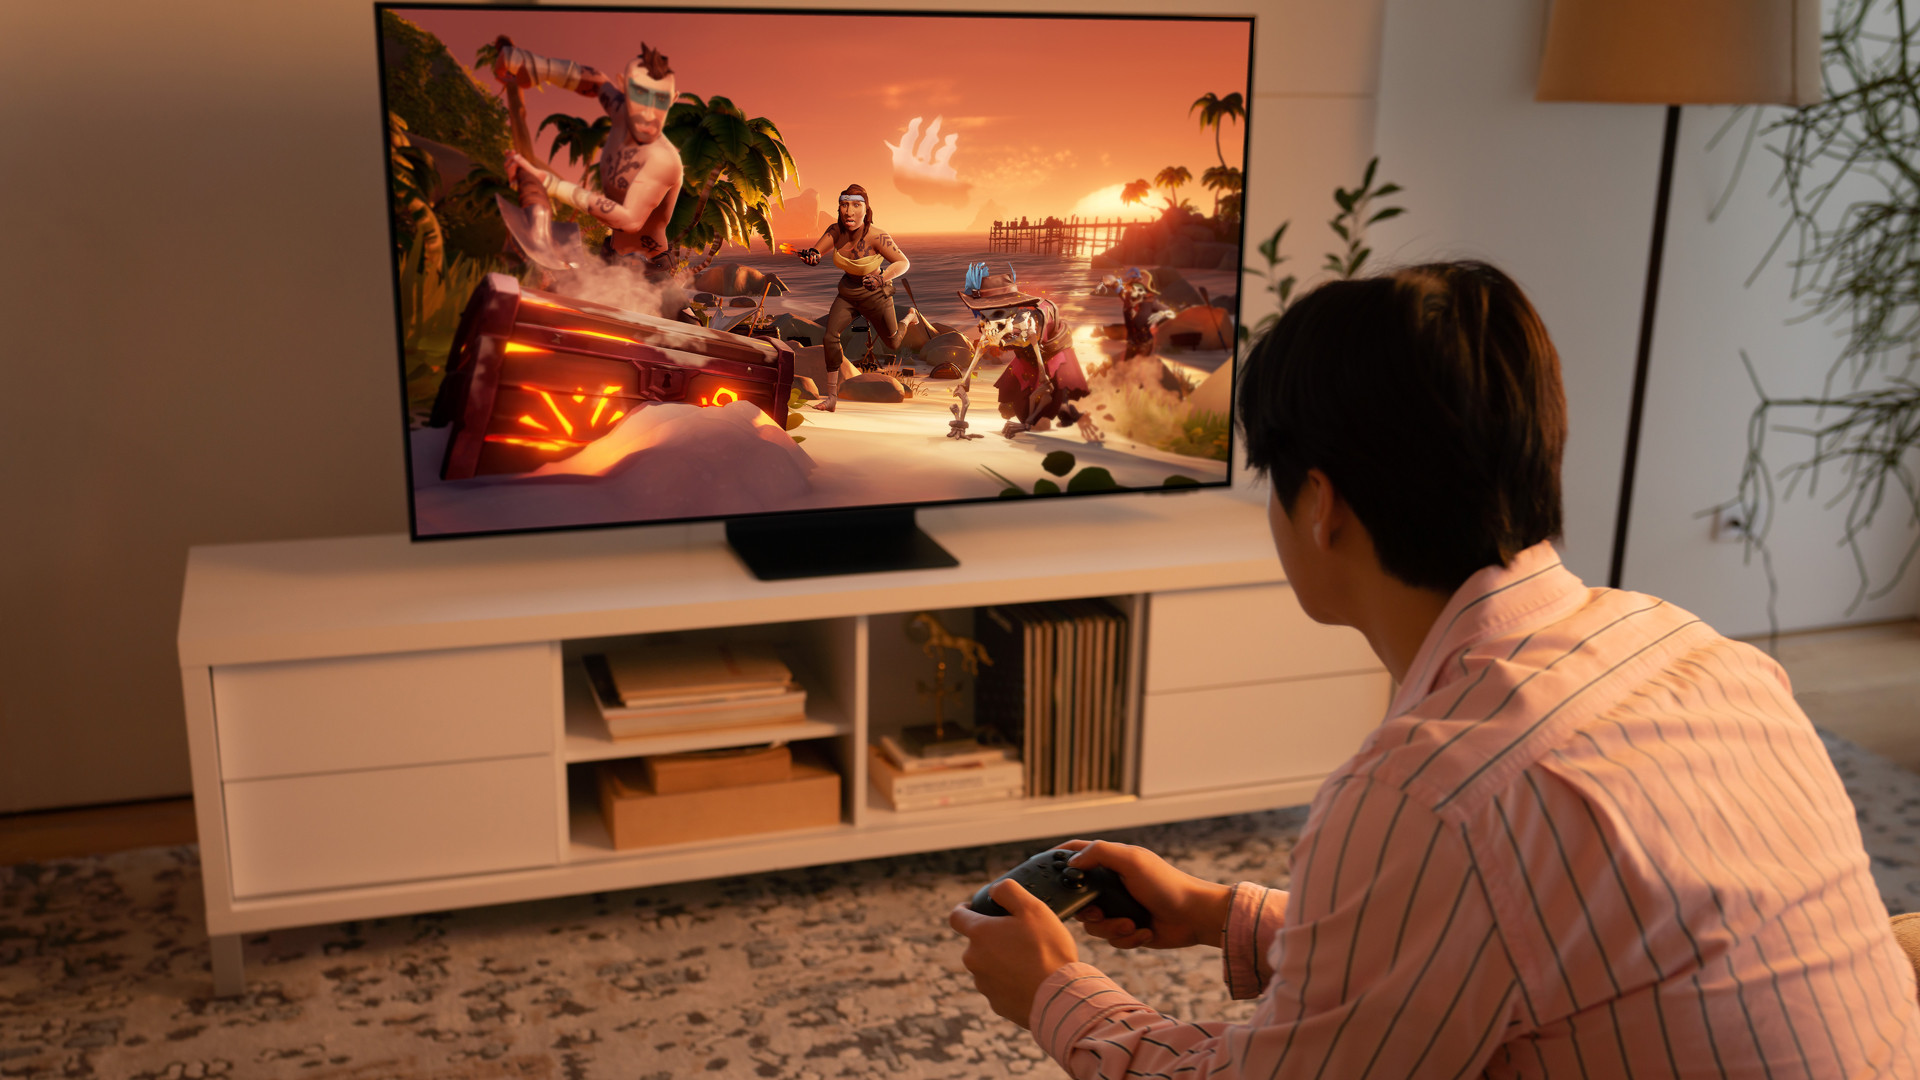 Xbox Cloud Gaming On Samsung TVs Is Super Impressive And Blows The